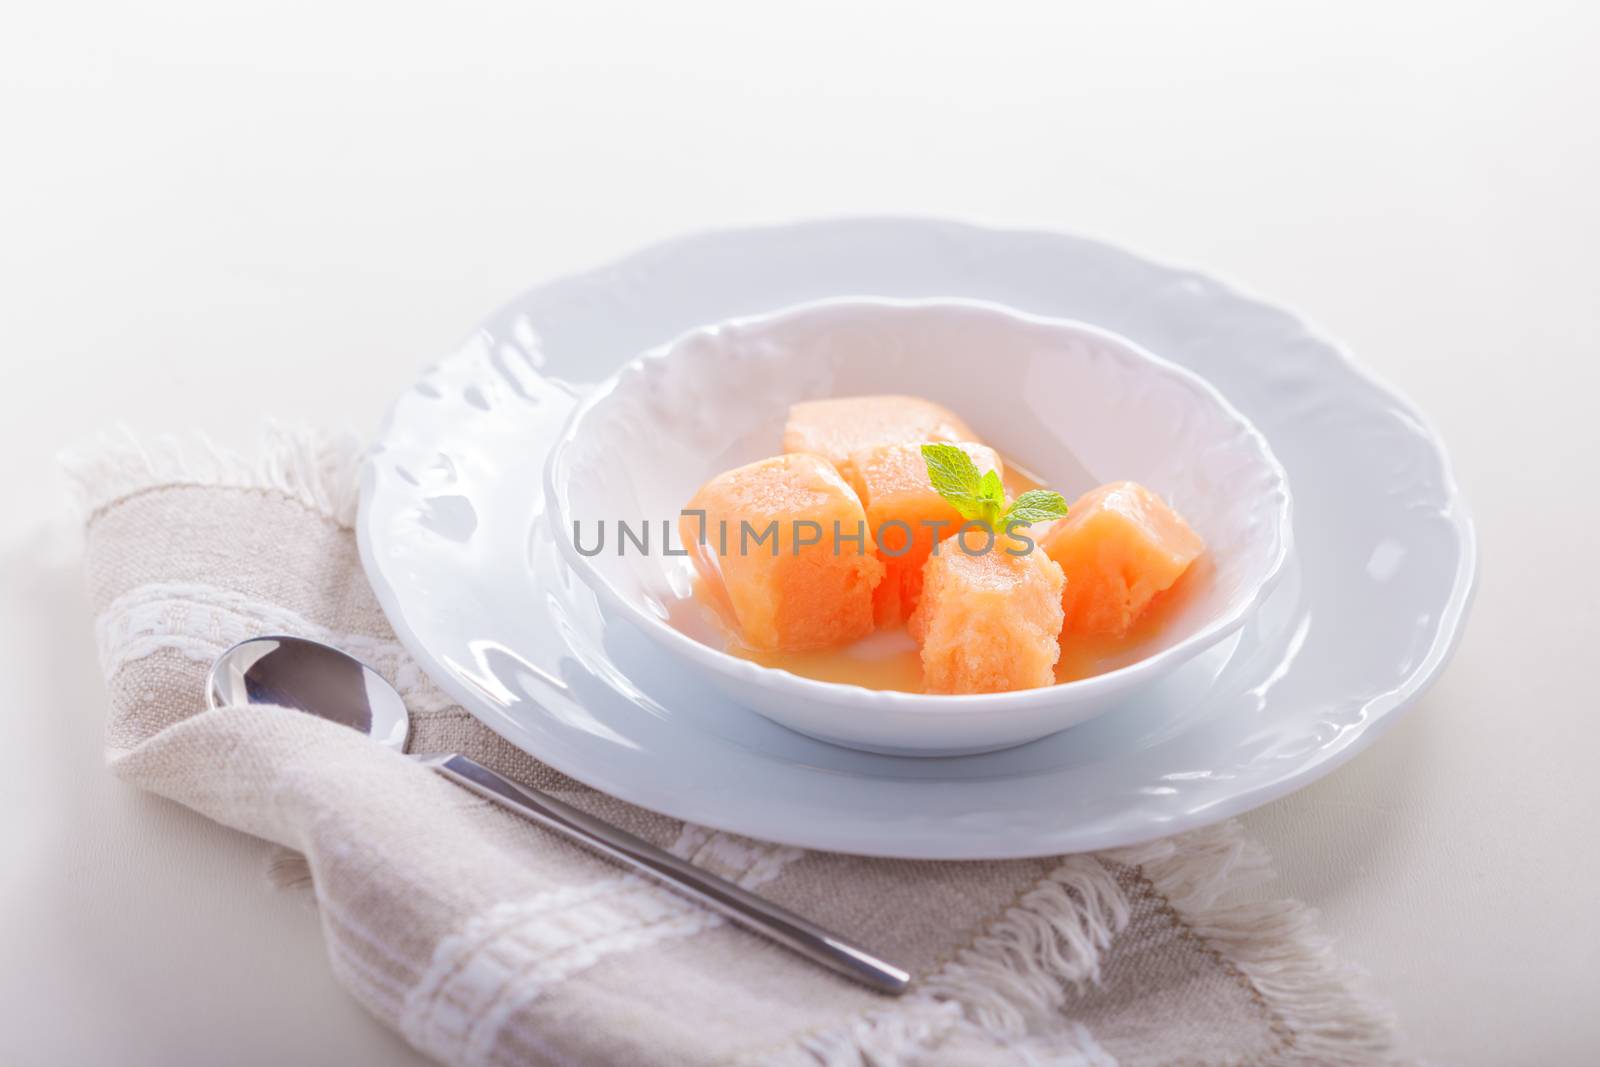 Apricot sorbet, natural sweet on a white plate